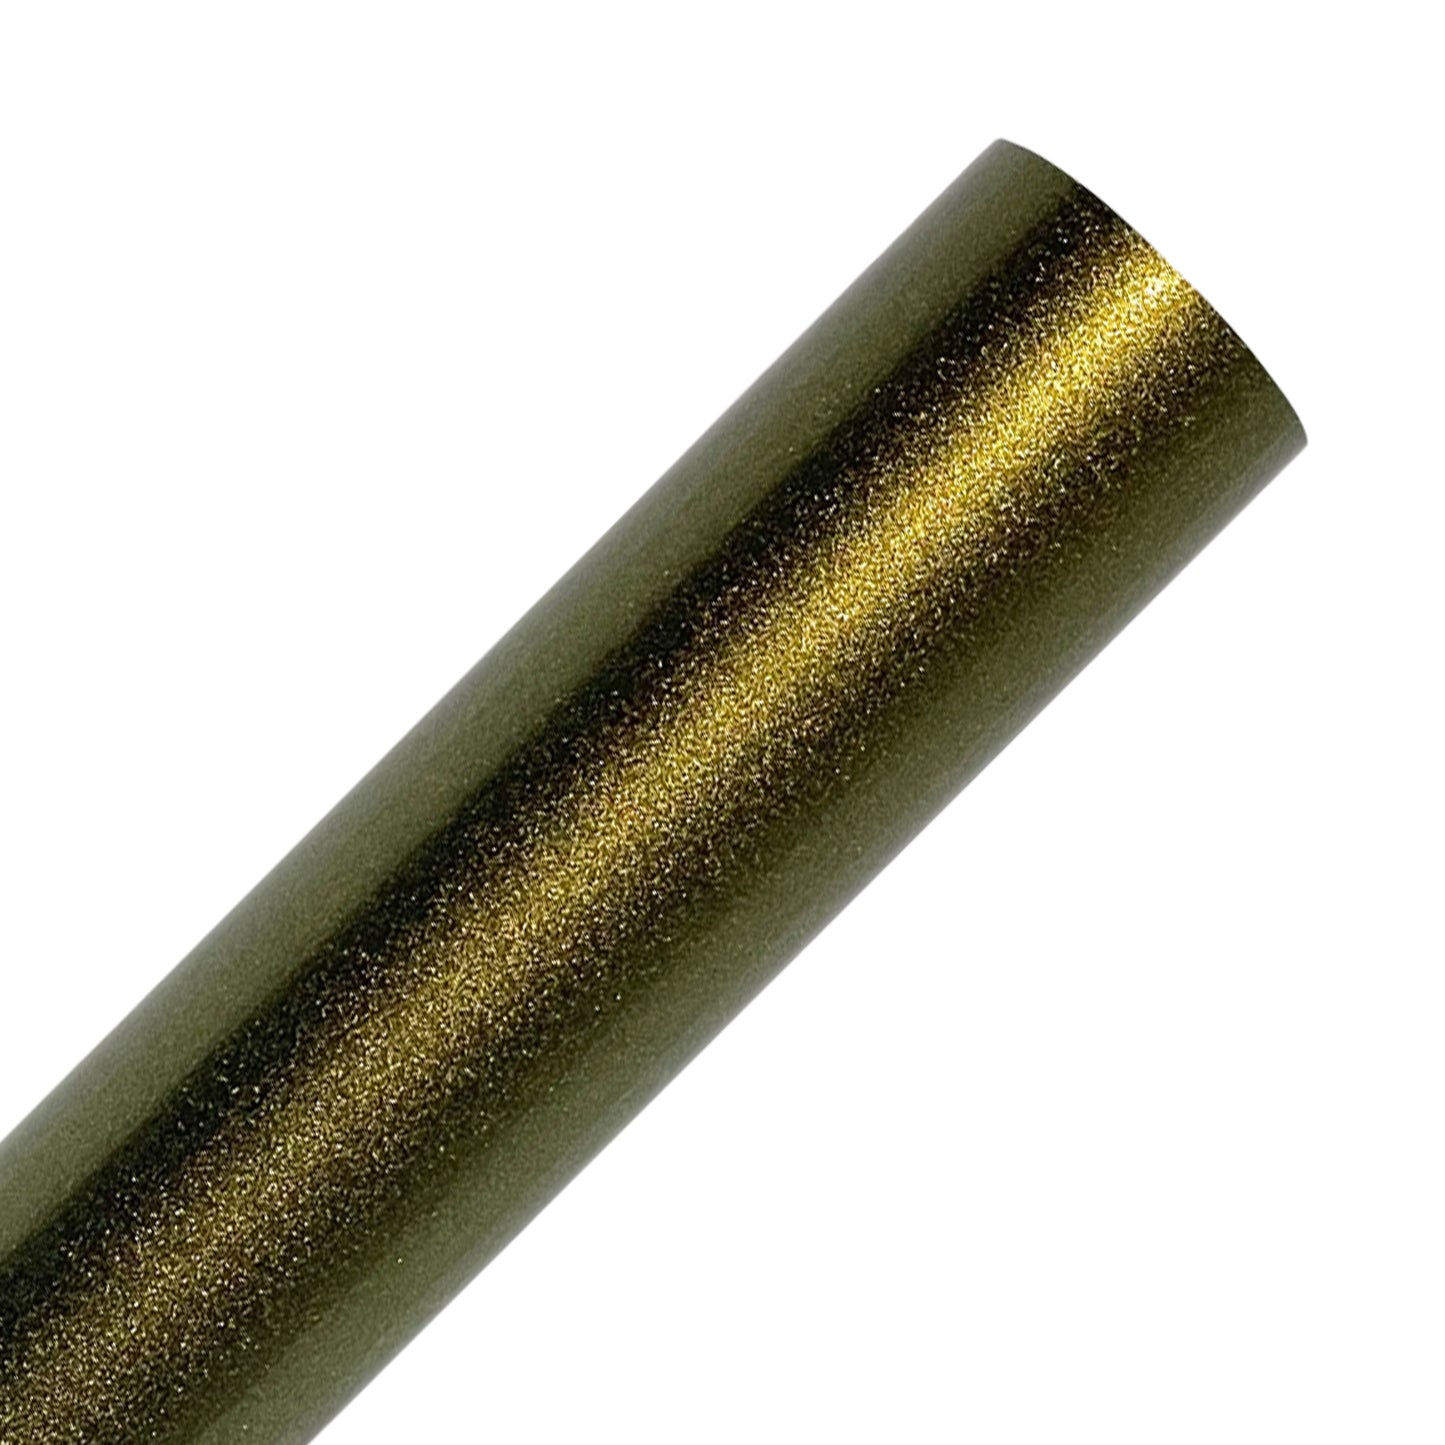 Gold Shimmer Glitter Adhesive Vinyl Rolls By Craftables